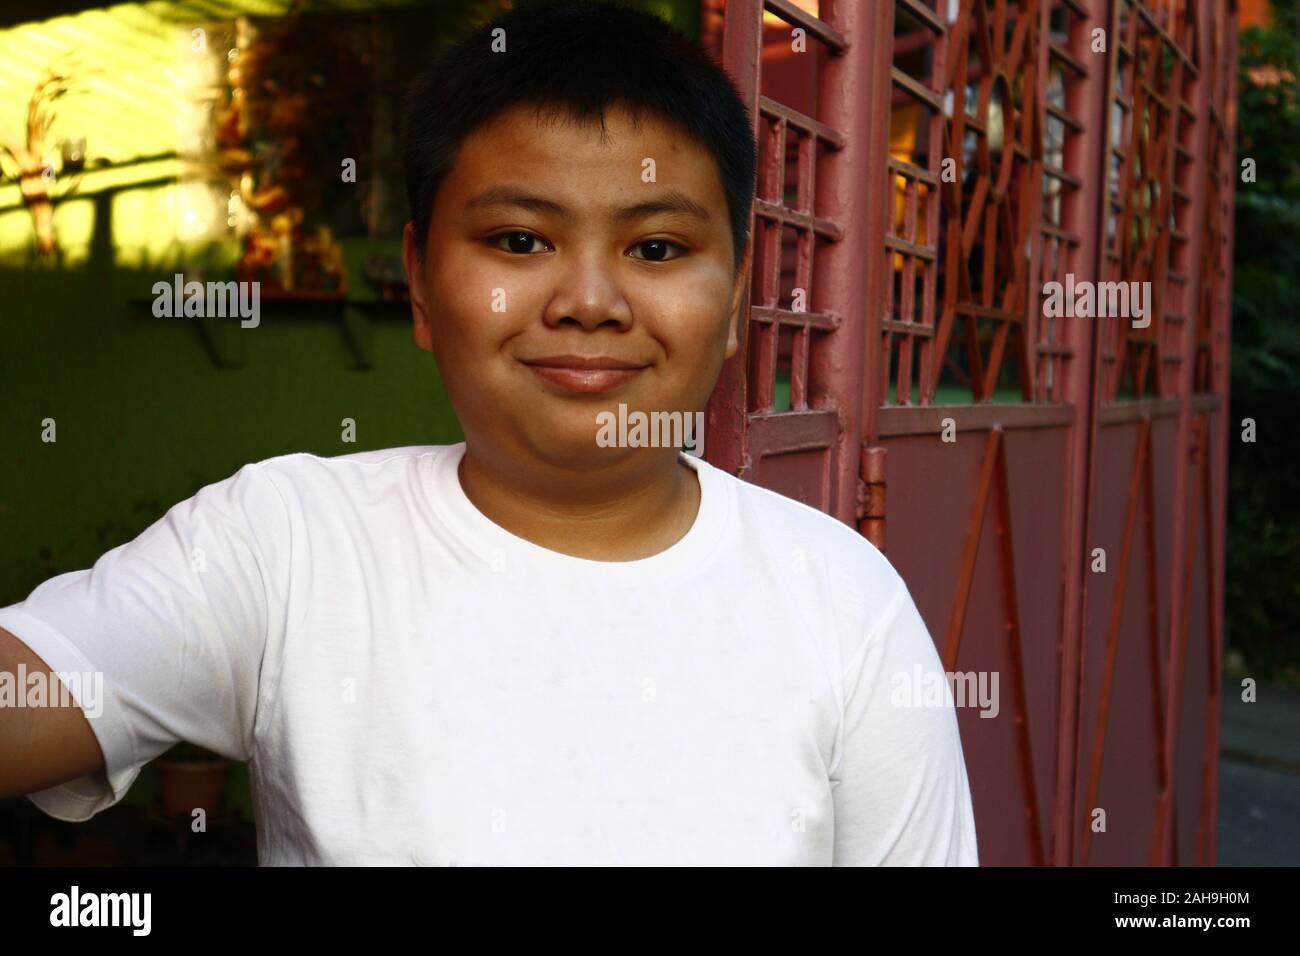 Portrait of young Asian boy smiling at the camera while standing in front of a gate Stock Photo